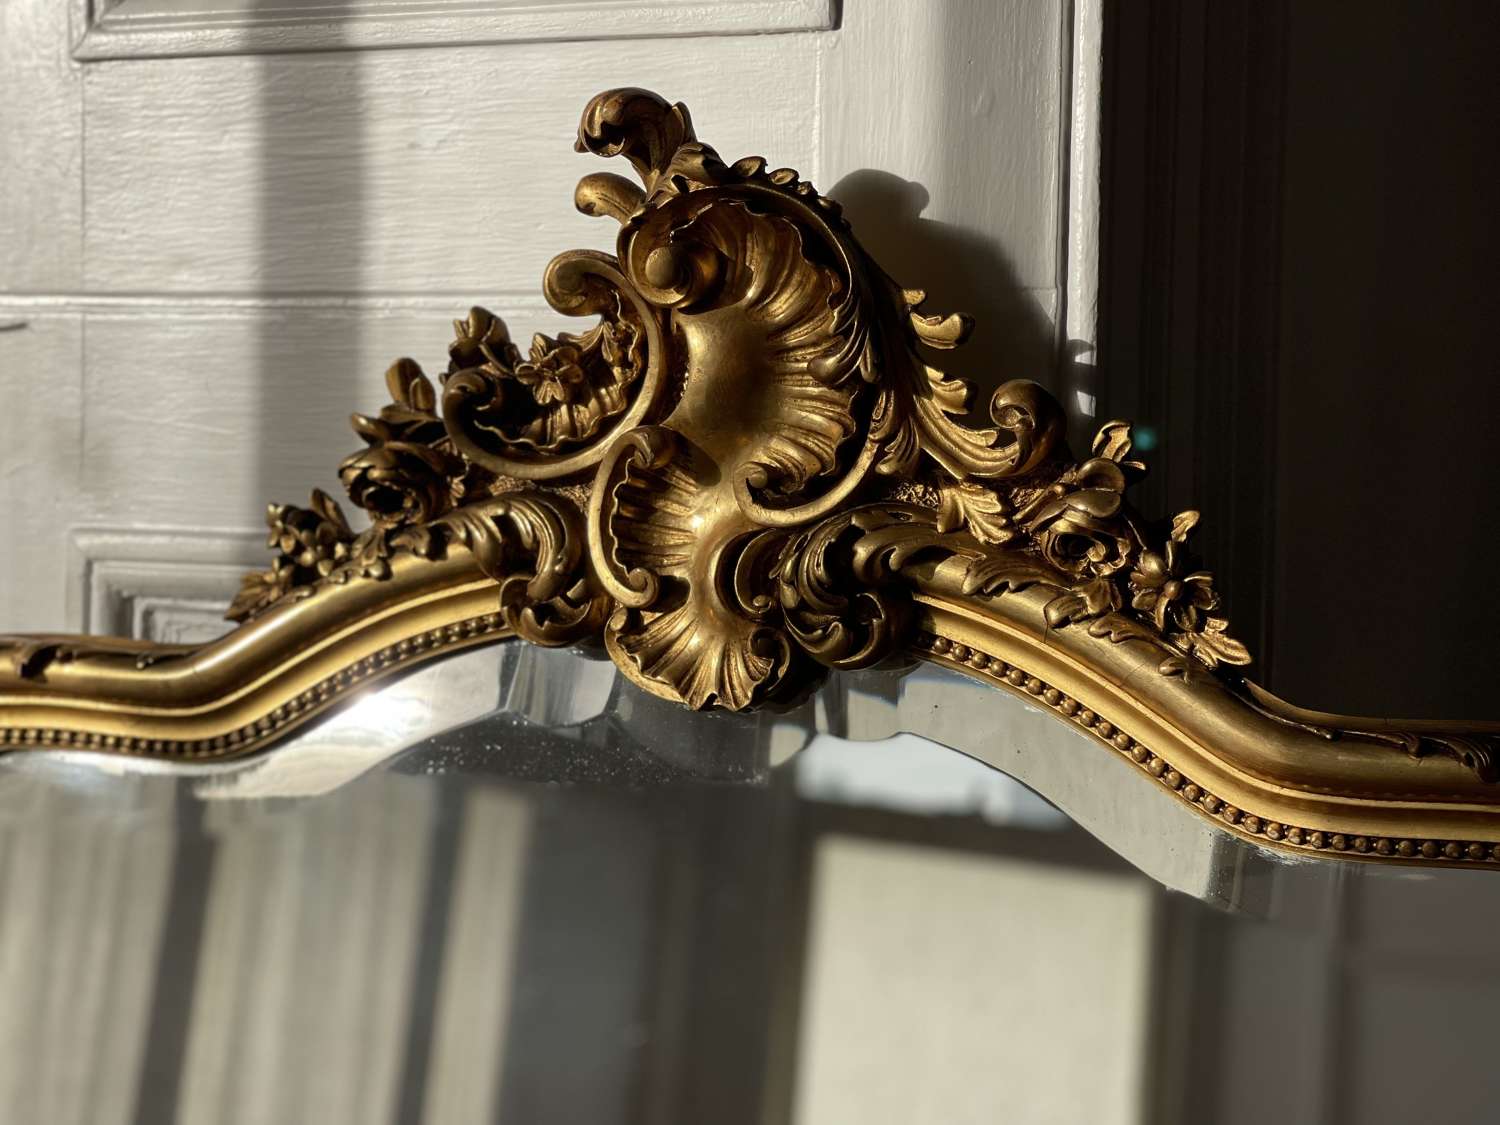 19th century French gilt mirror - bevelled glass